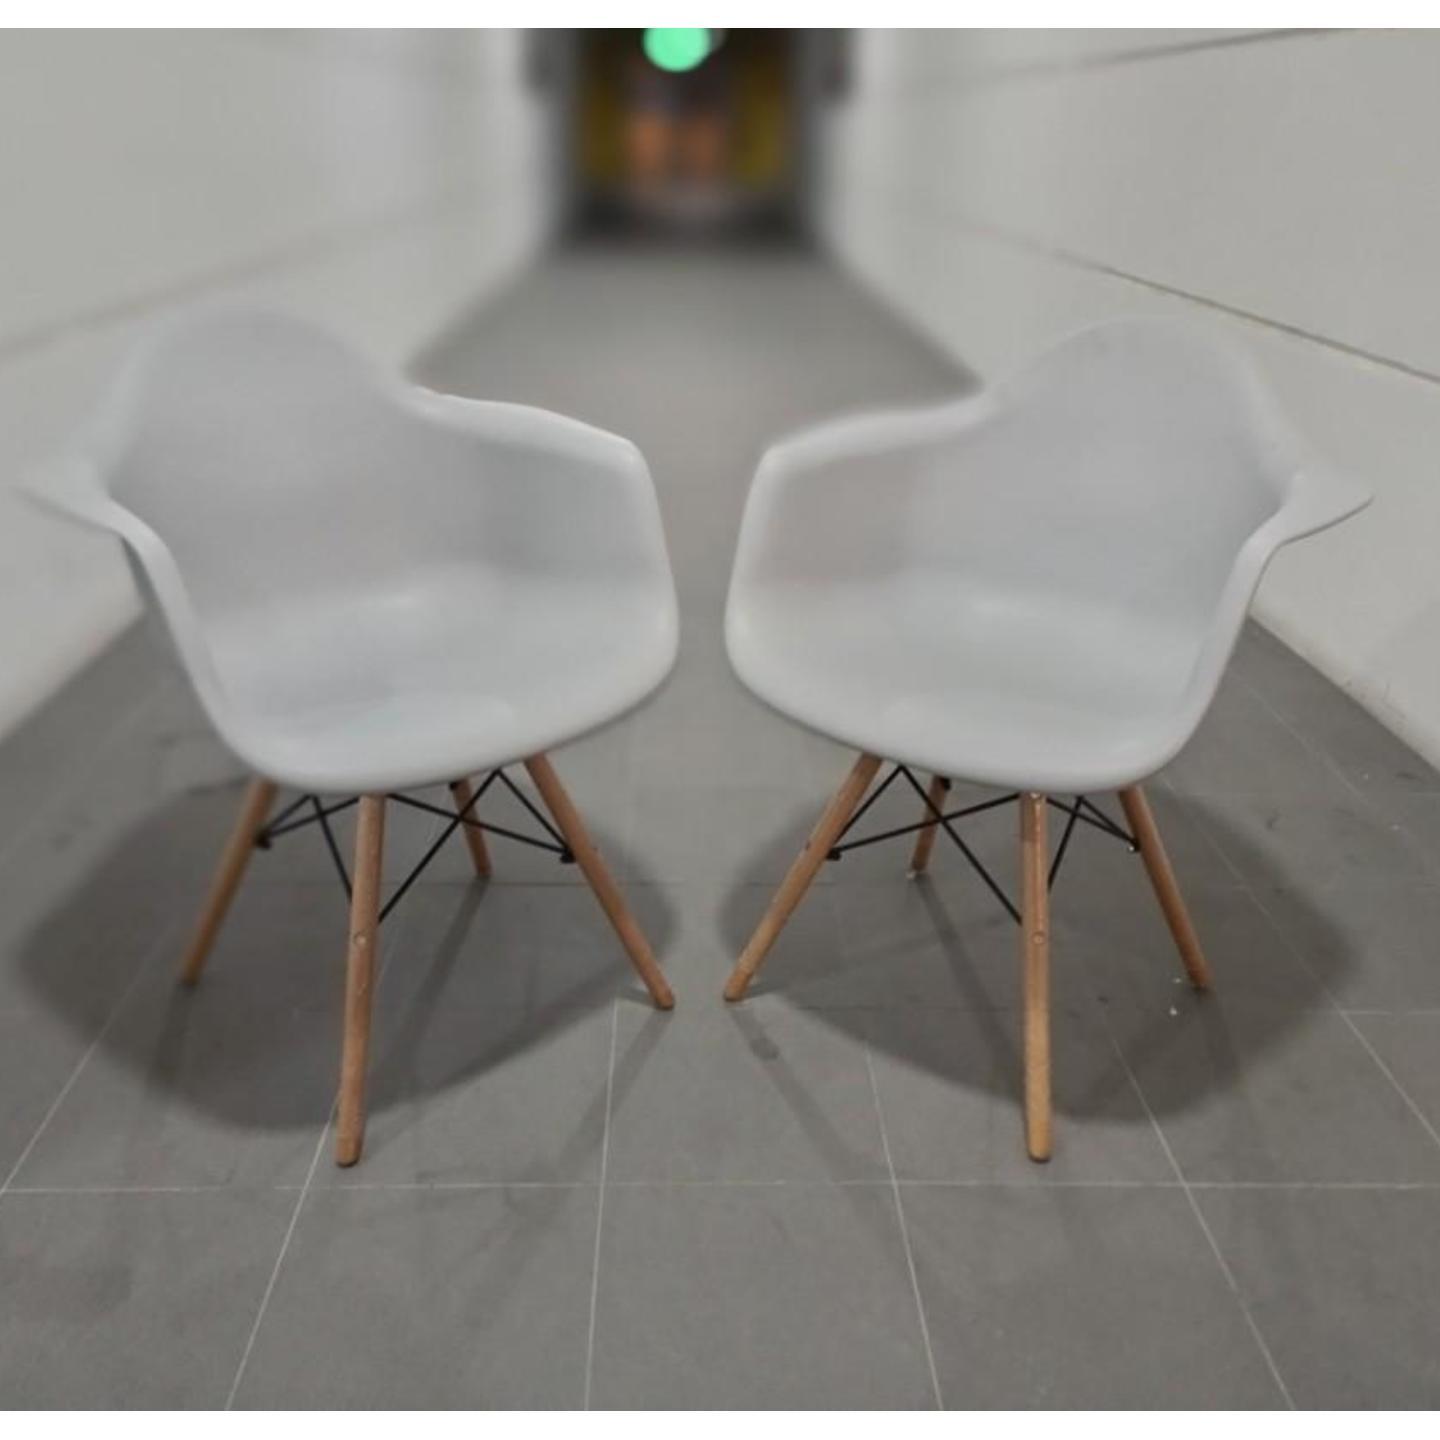 2 x RAYS Eames Armchair in LIGHT GREY